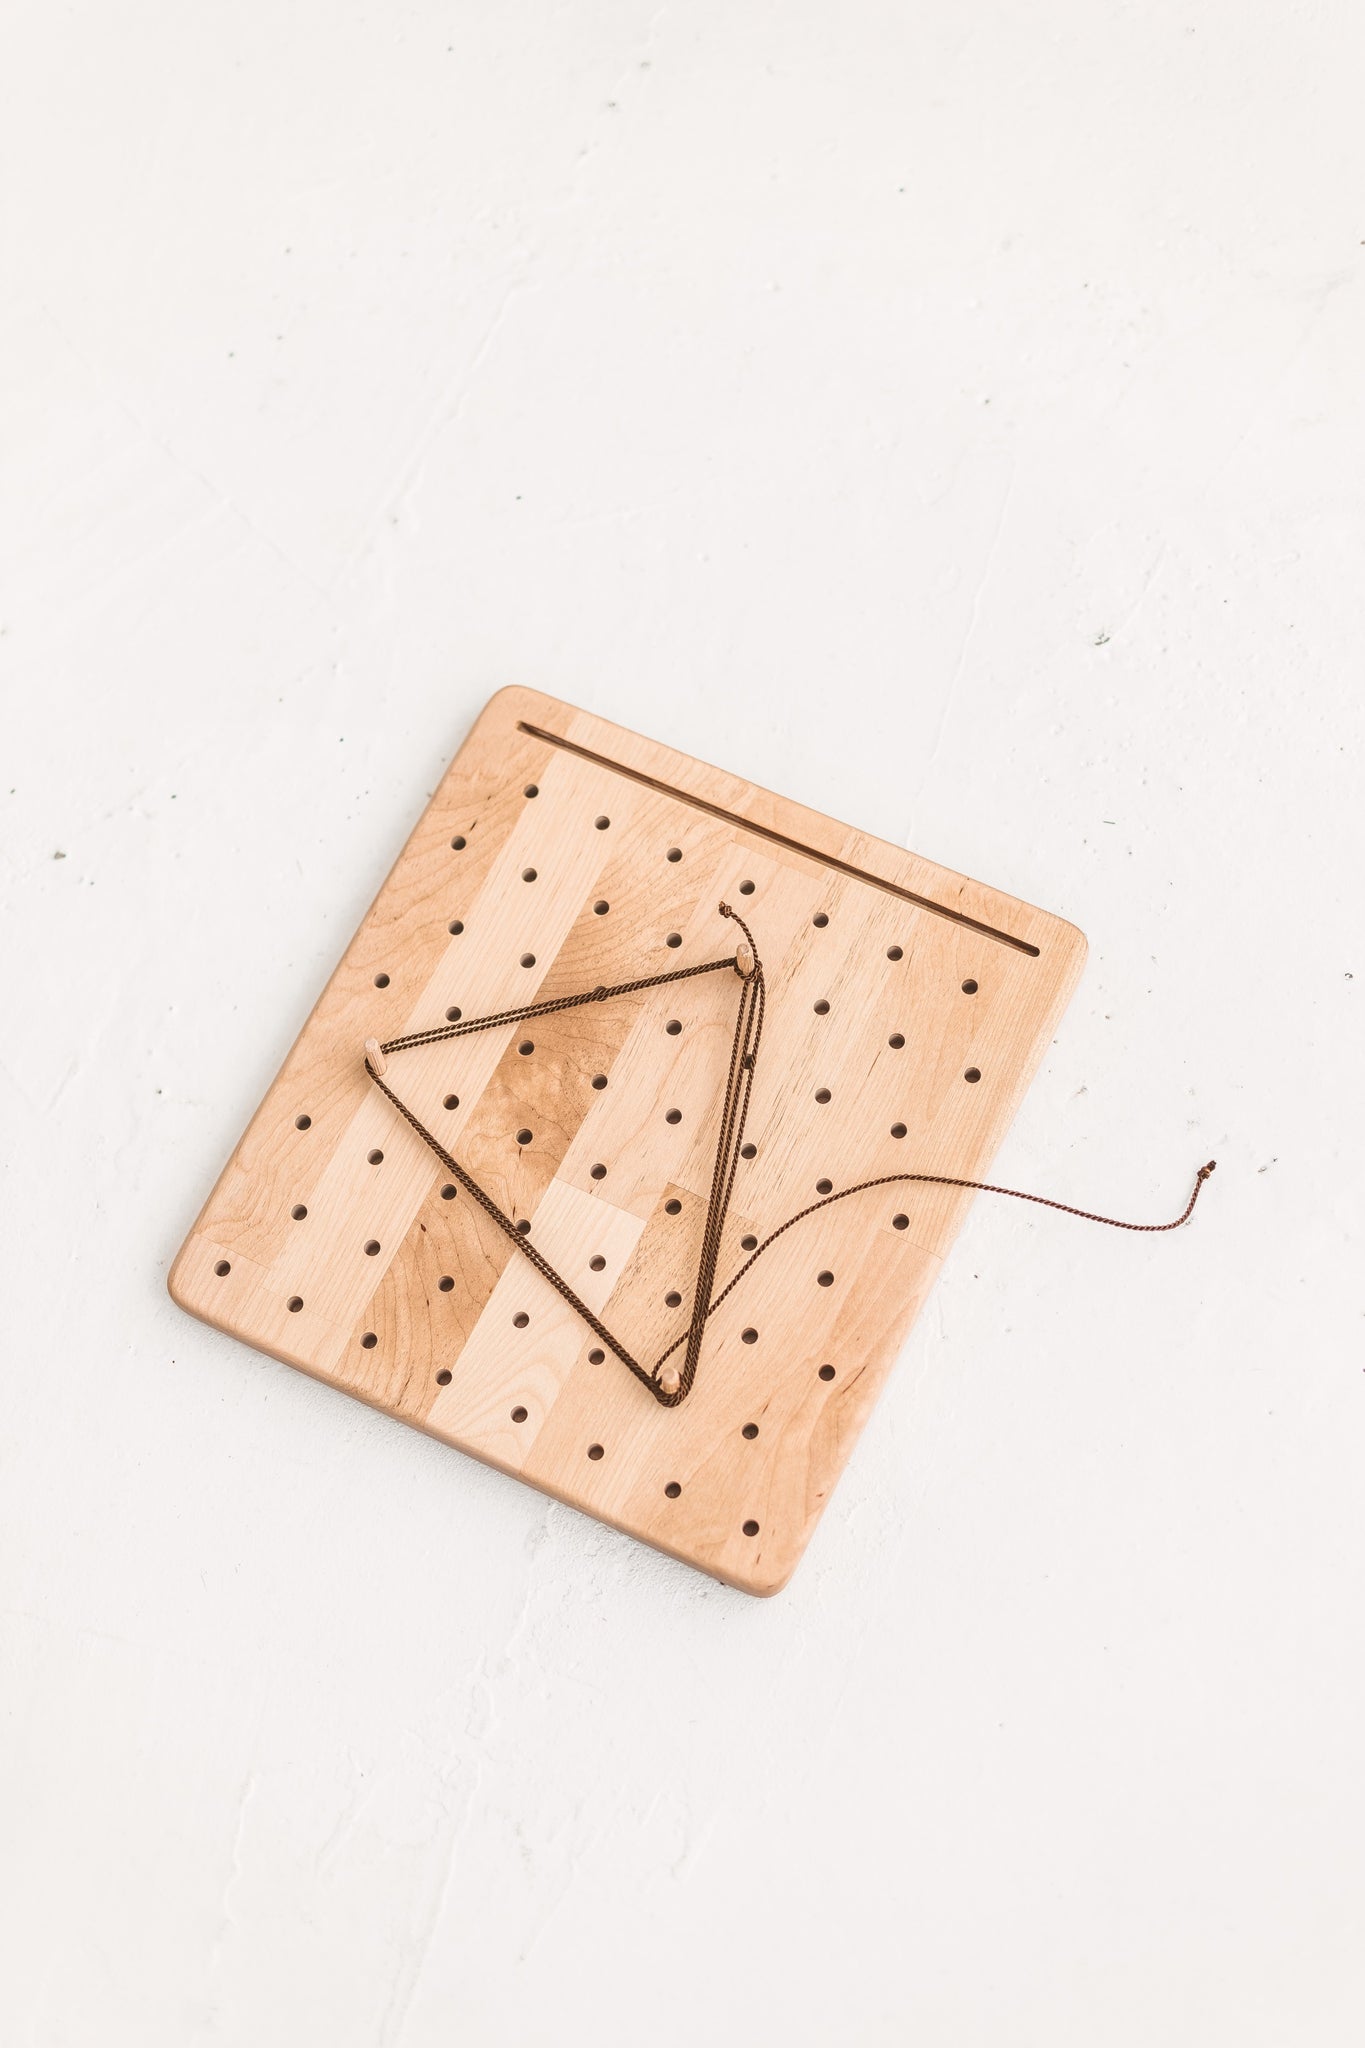 Wooden Peg Board with Cards Holder